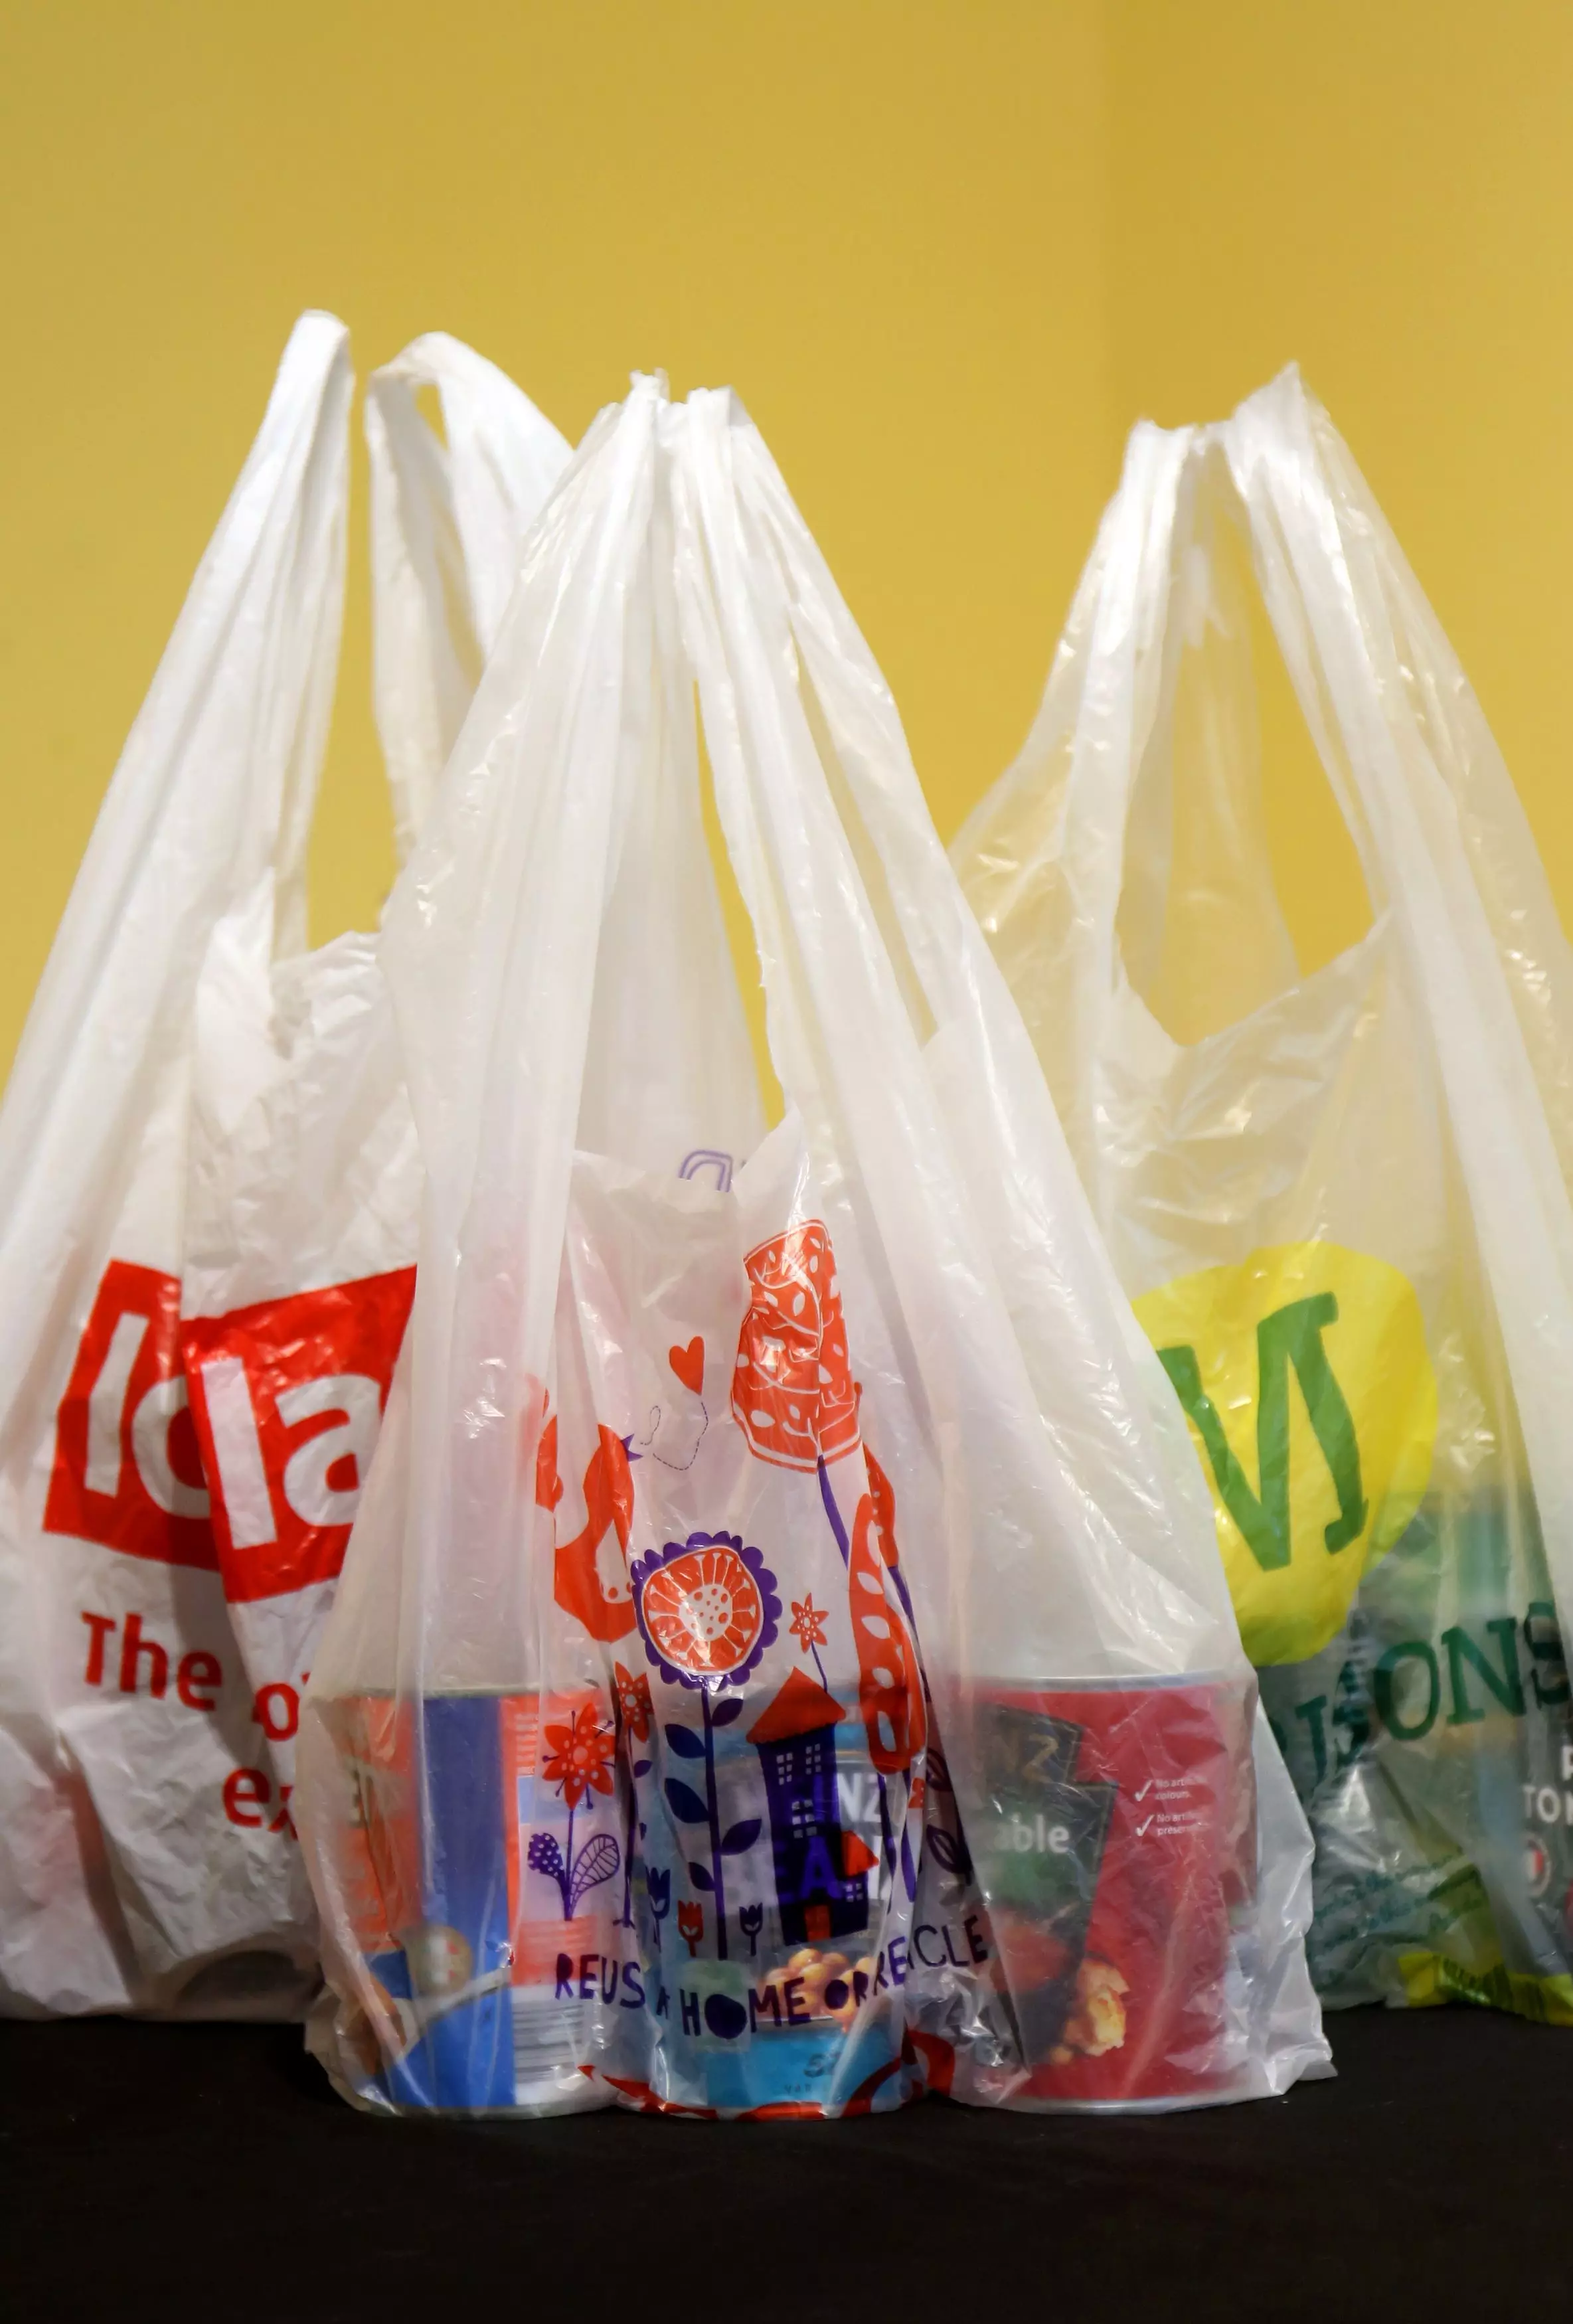 Supermarket plastic bags will soon be a thing of the past.